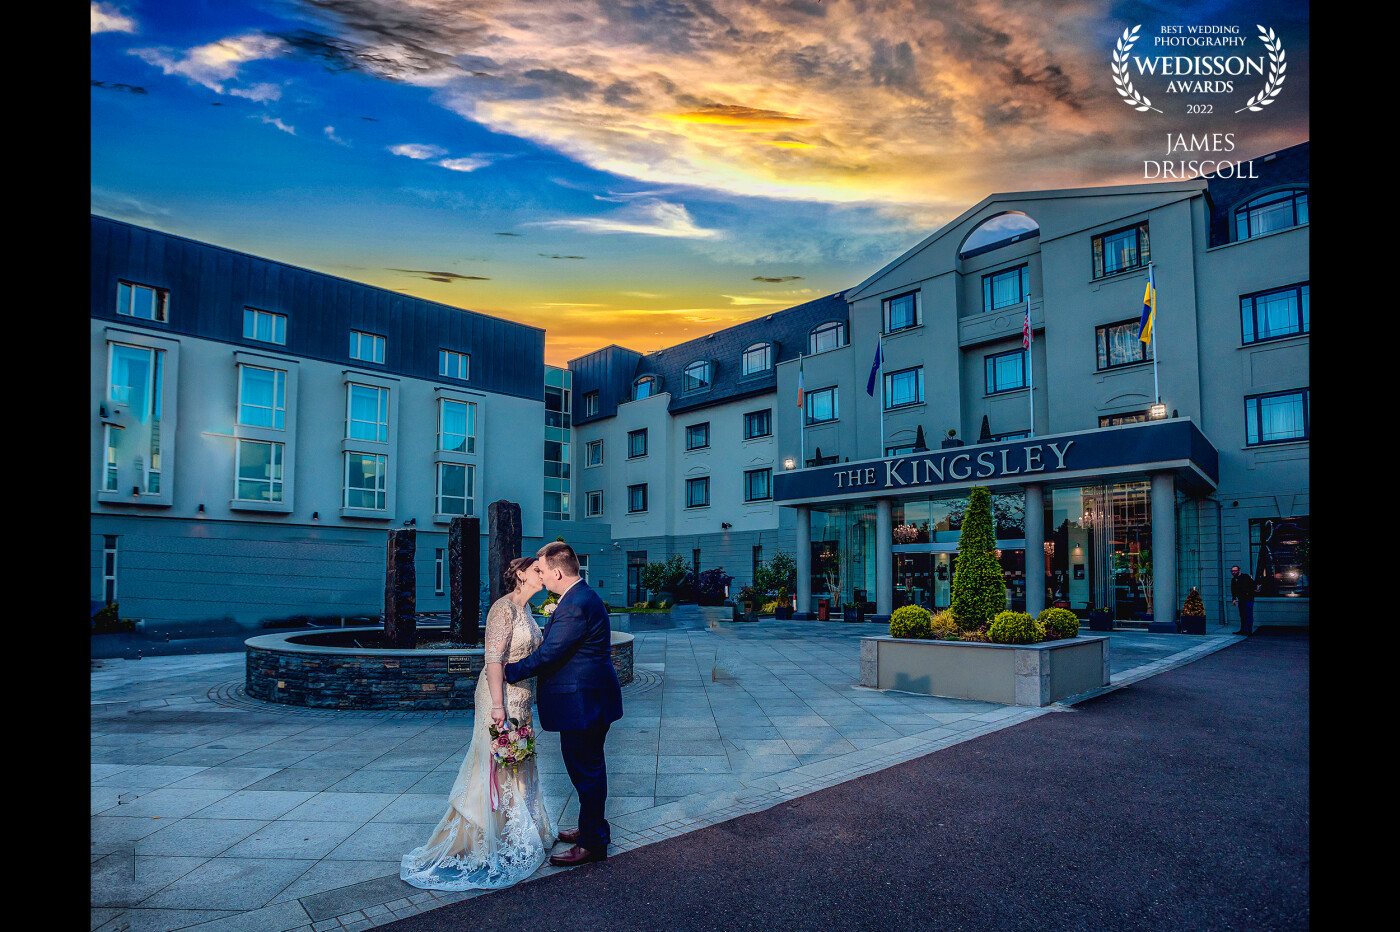 Ed & Claire <br />
We capture some images at the back of the hotel which is located closer to the water as the sun was setting. On our way back into the hotel i suggested we try one image outside to include the hotel into the sunset..